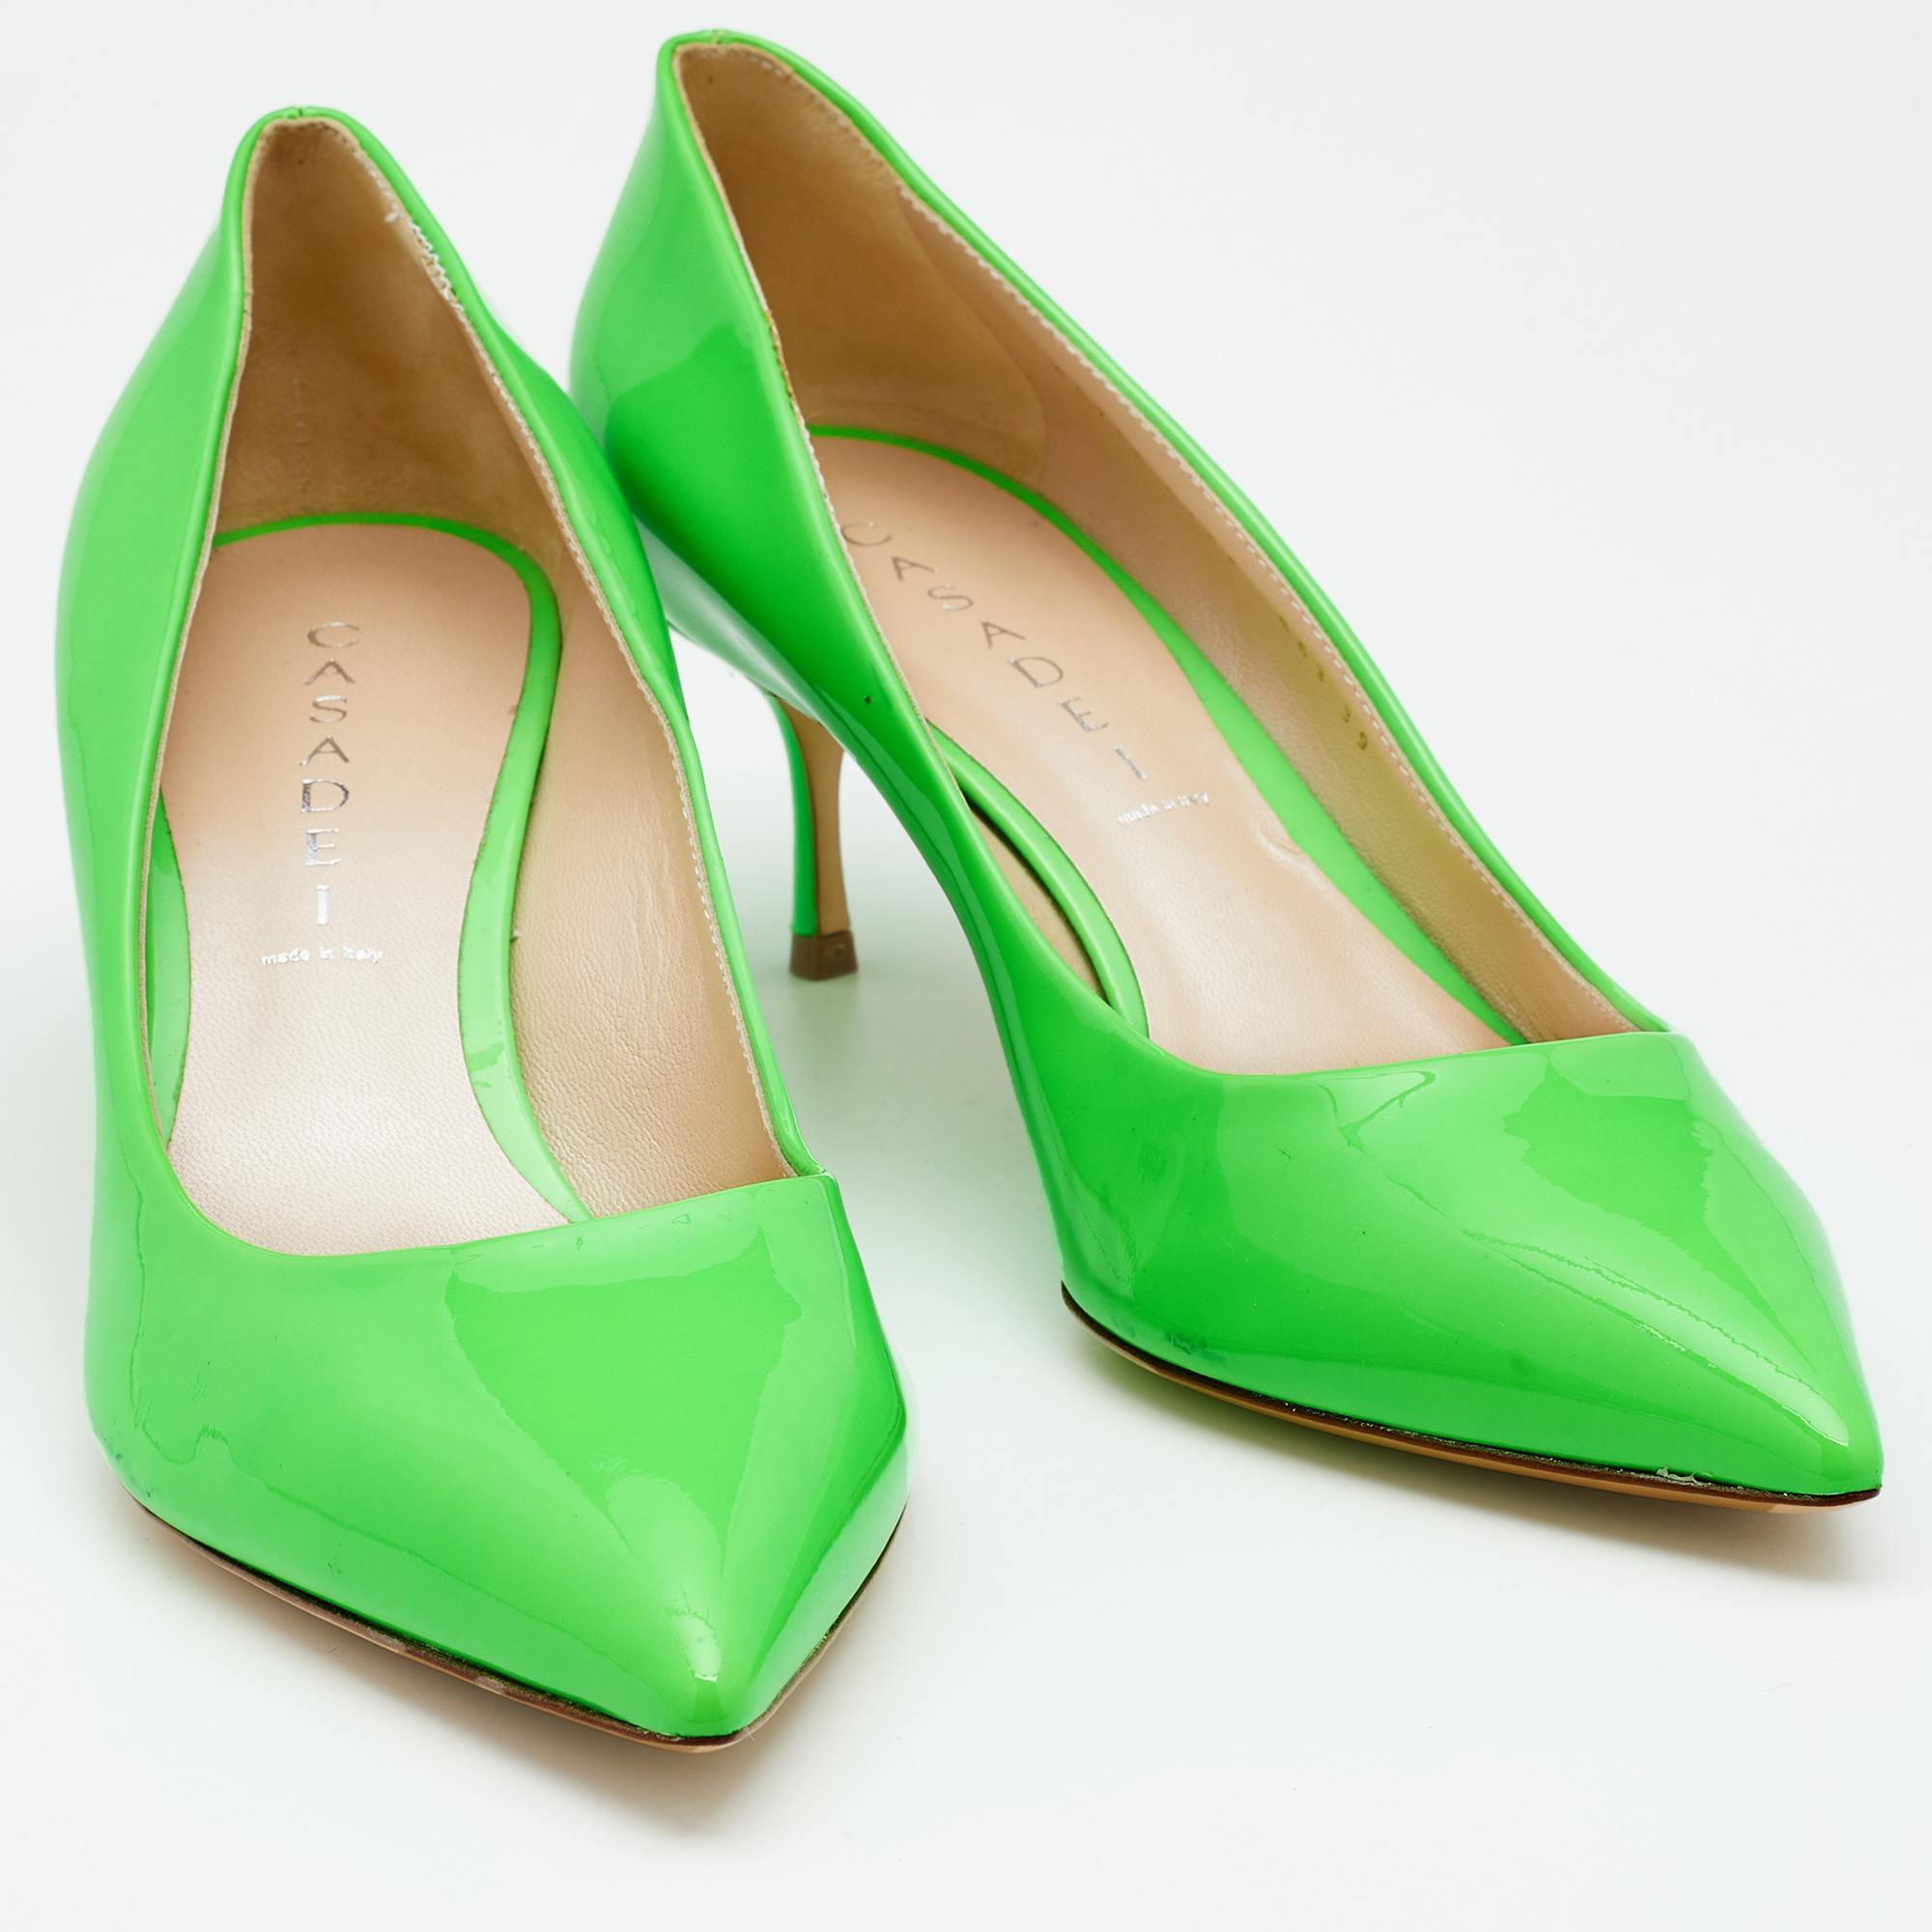 Casadei Neon Green Patent Leather Pumps Size 39